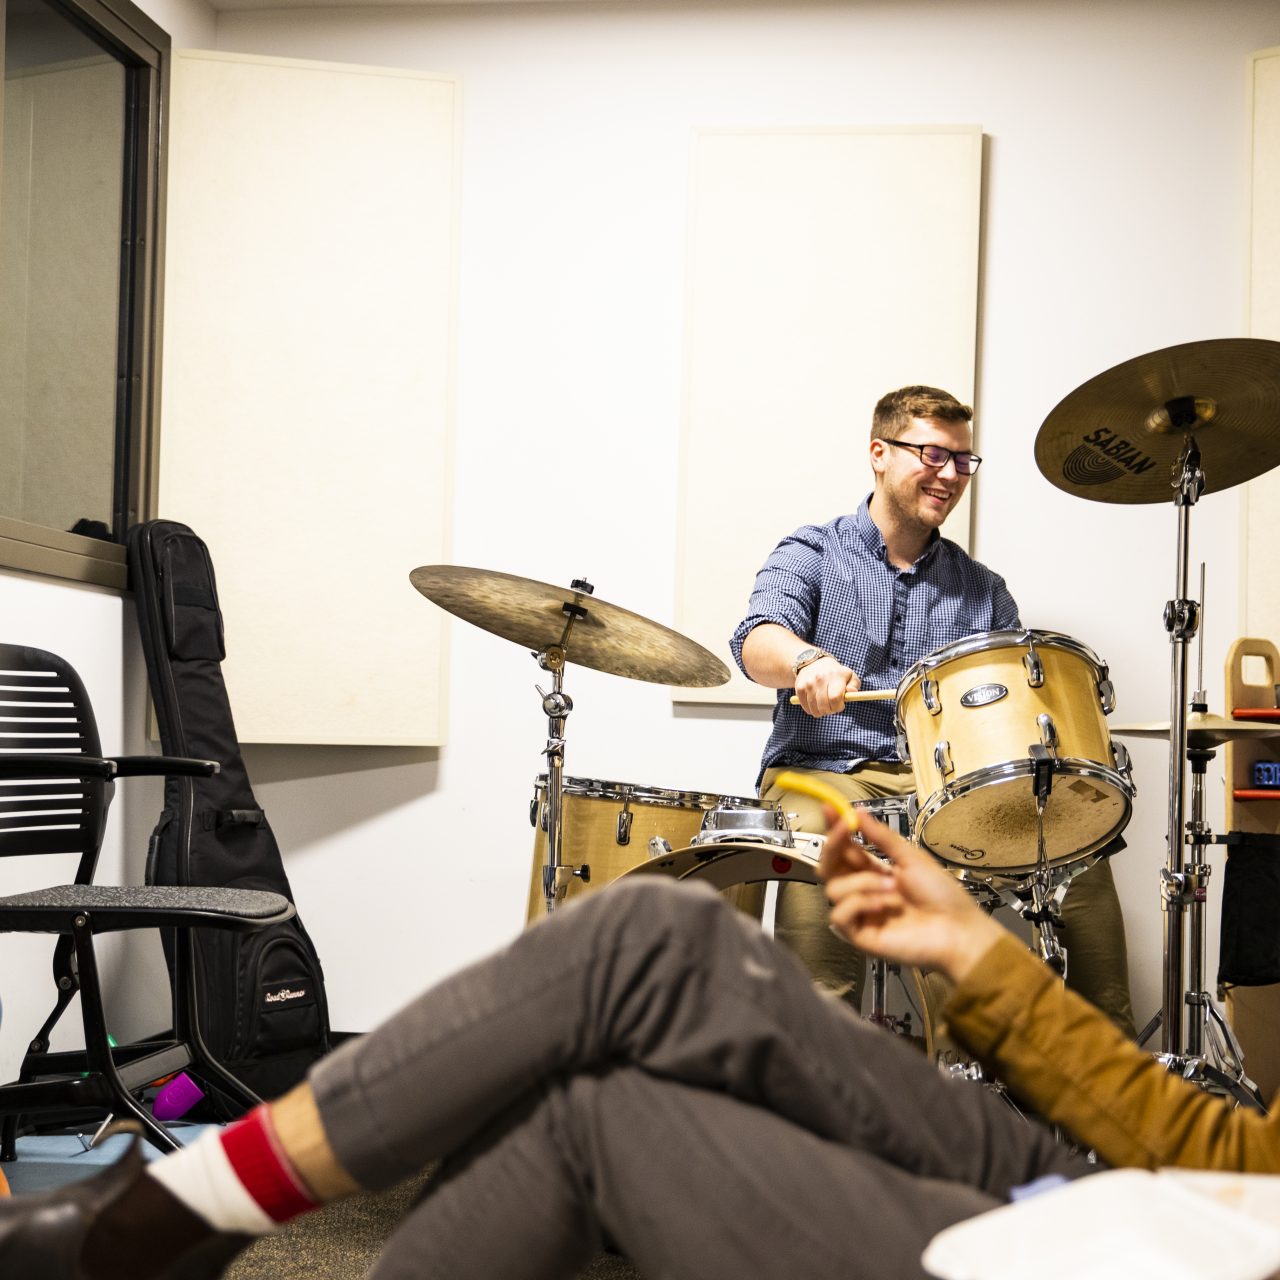 Group of students in a room playing drums and sitting on couches